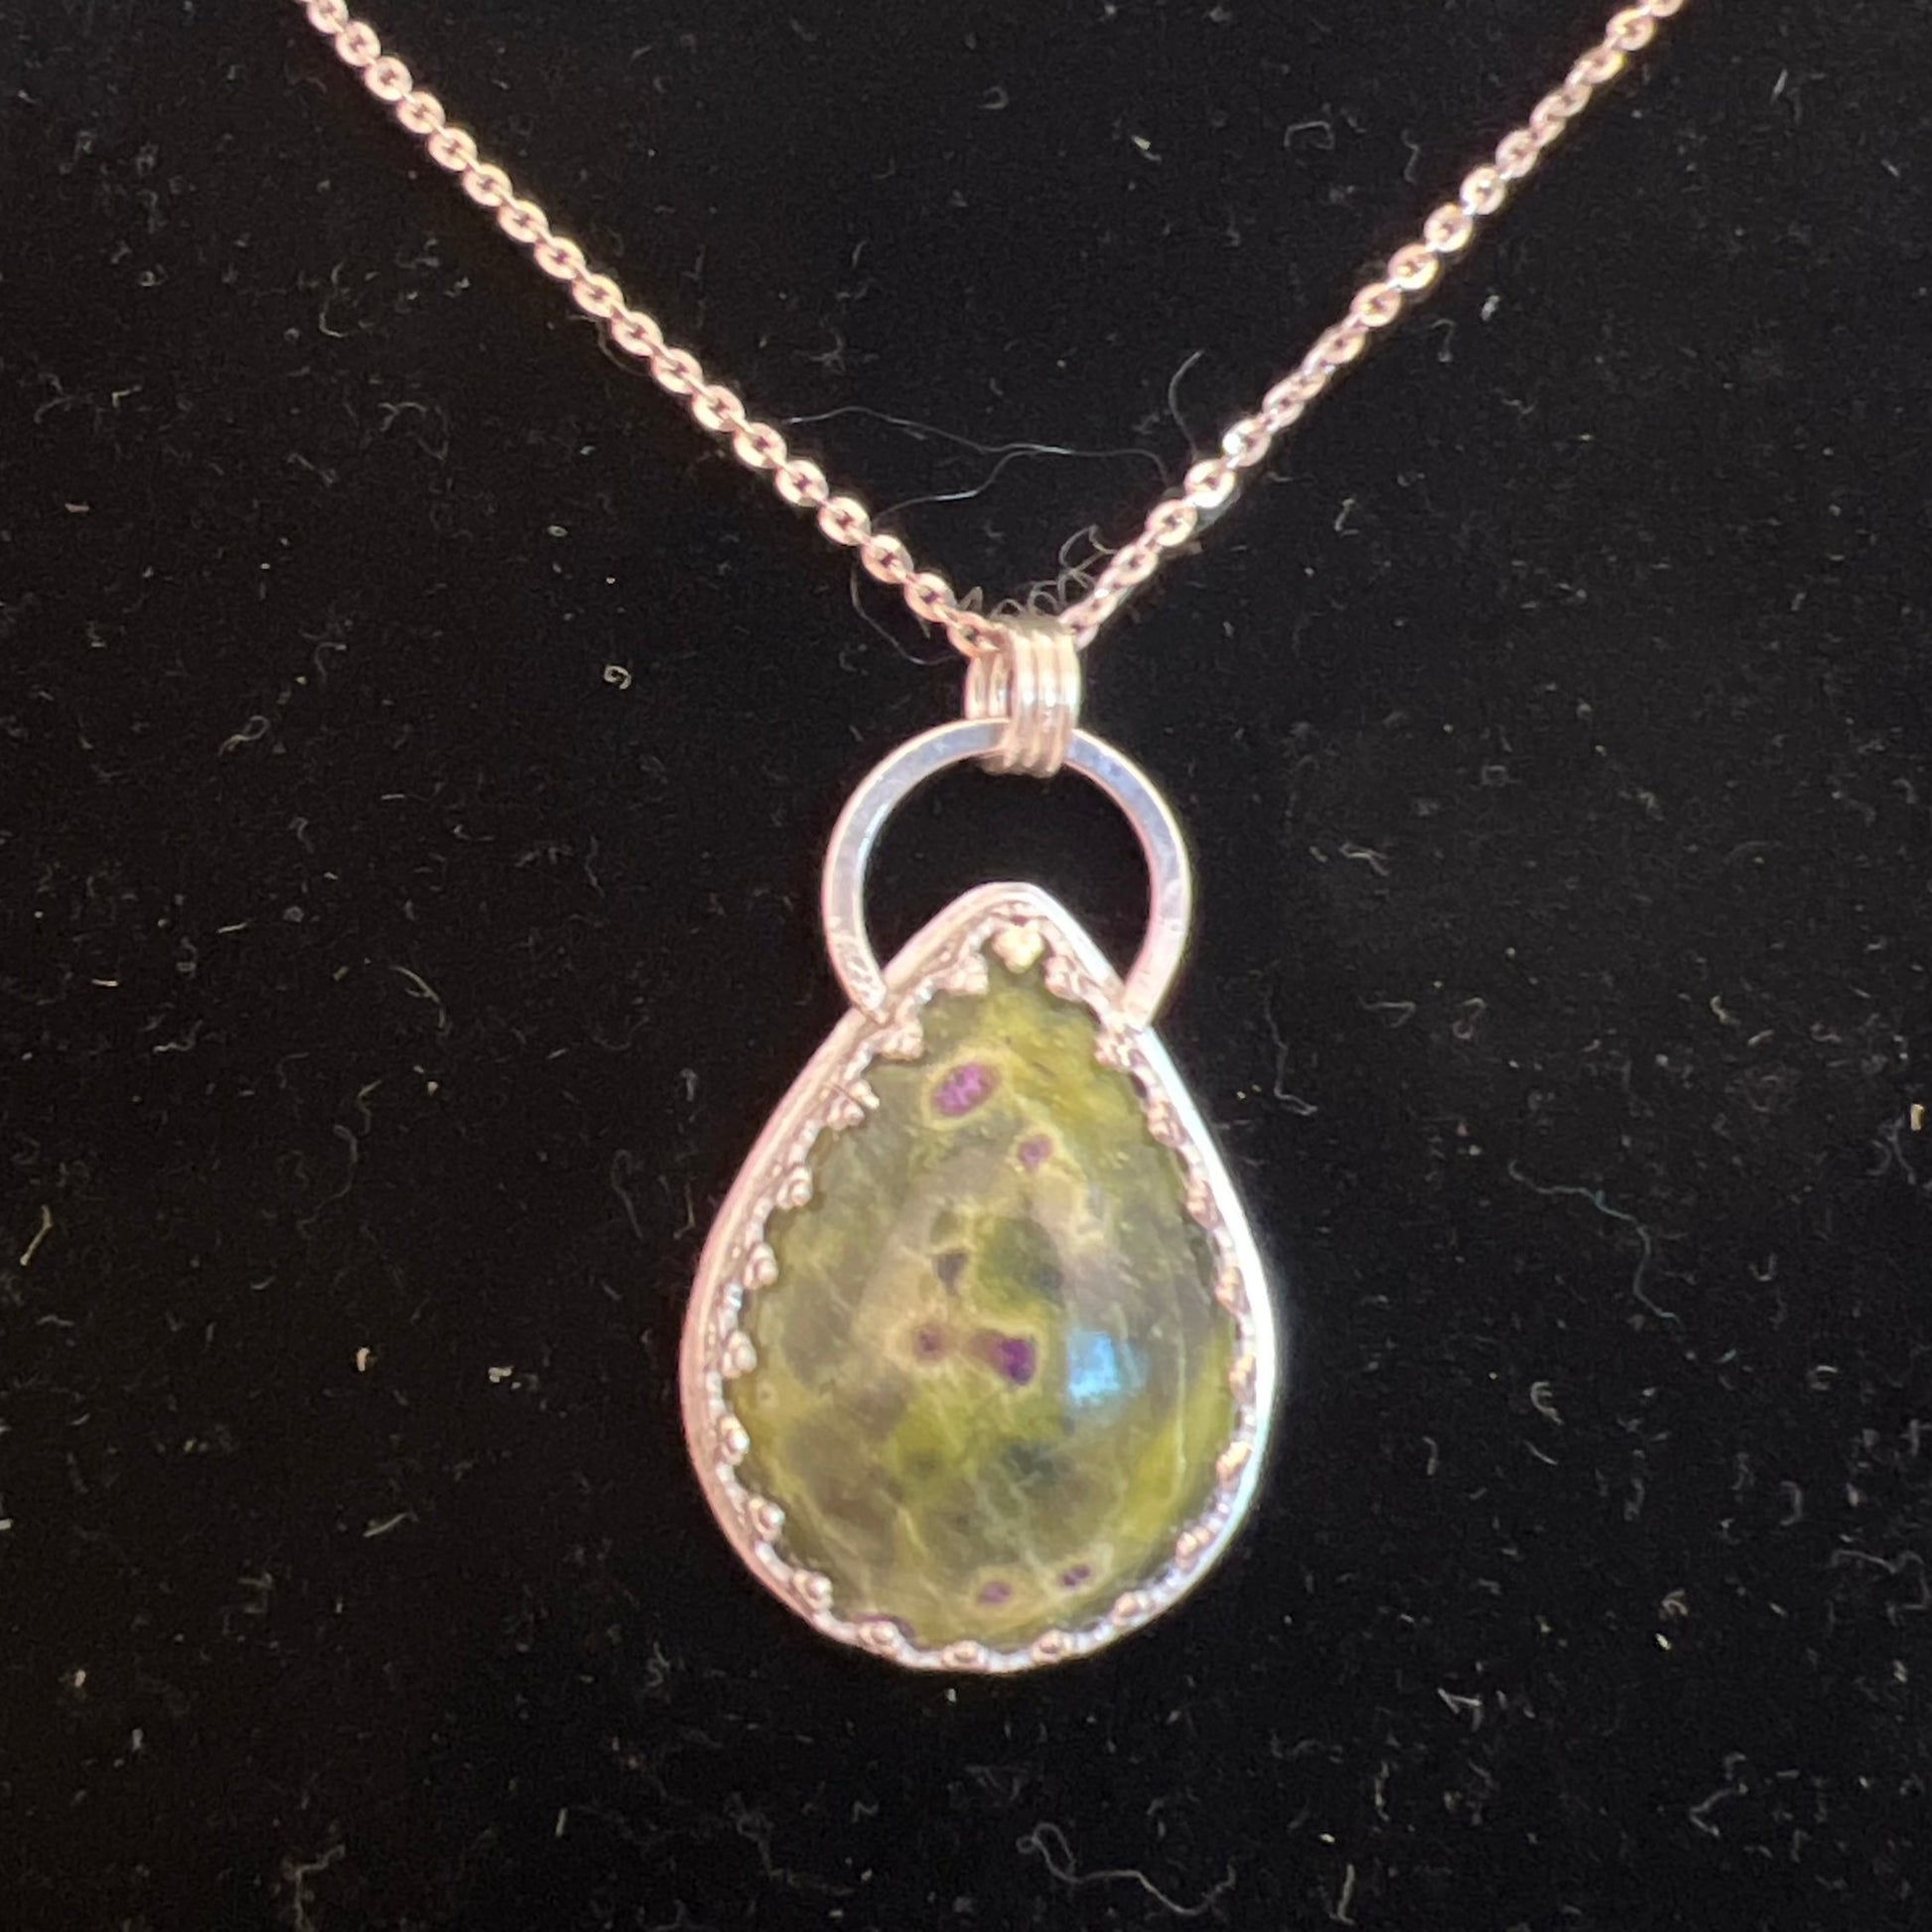 Teardrop stichtite sterling silver pendant on 20" sterling silver chain